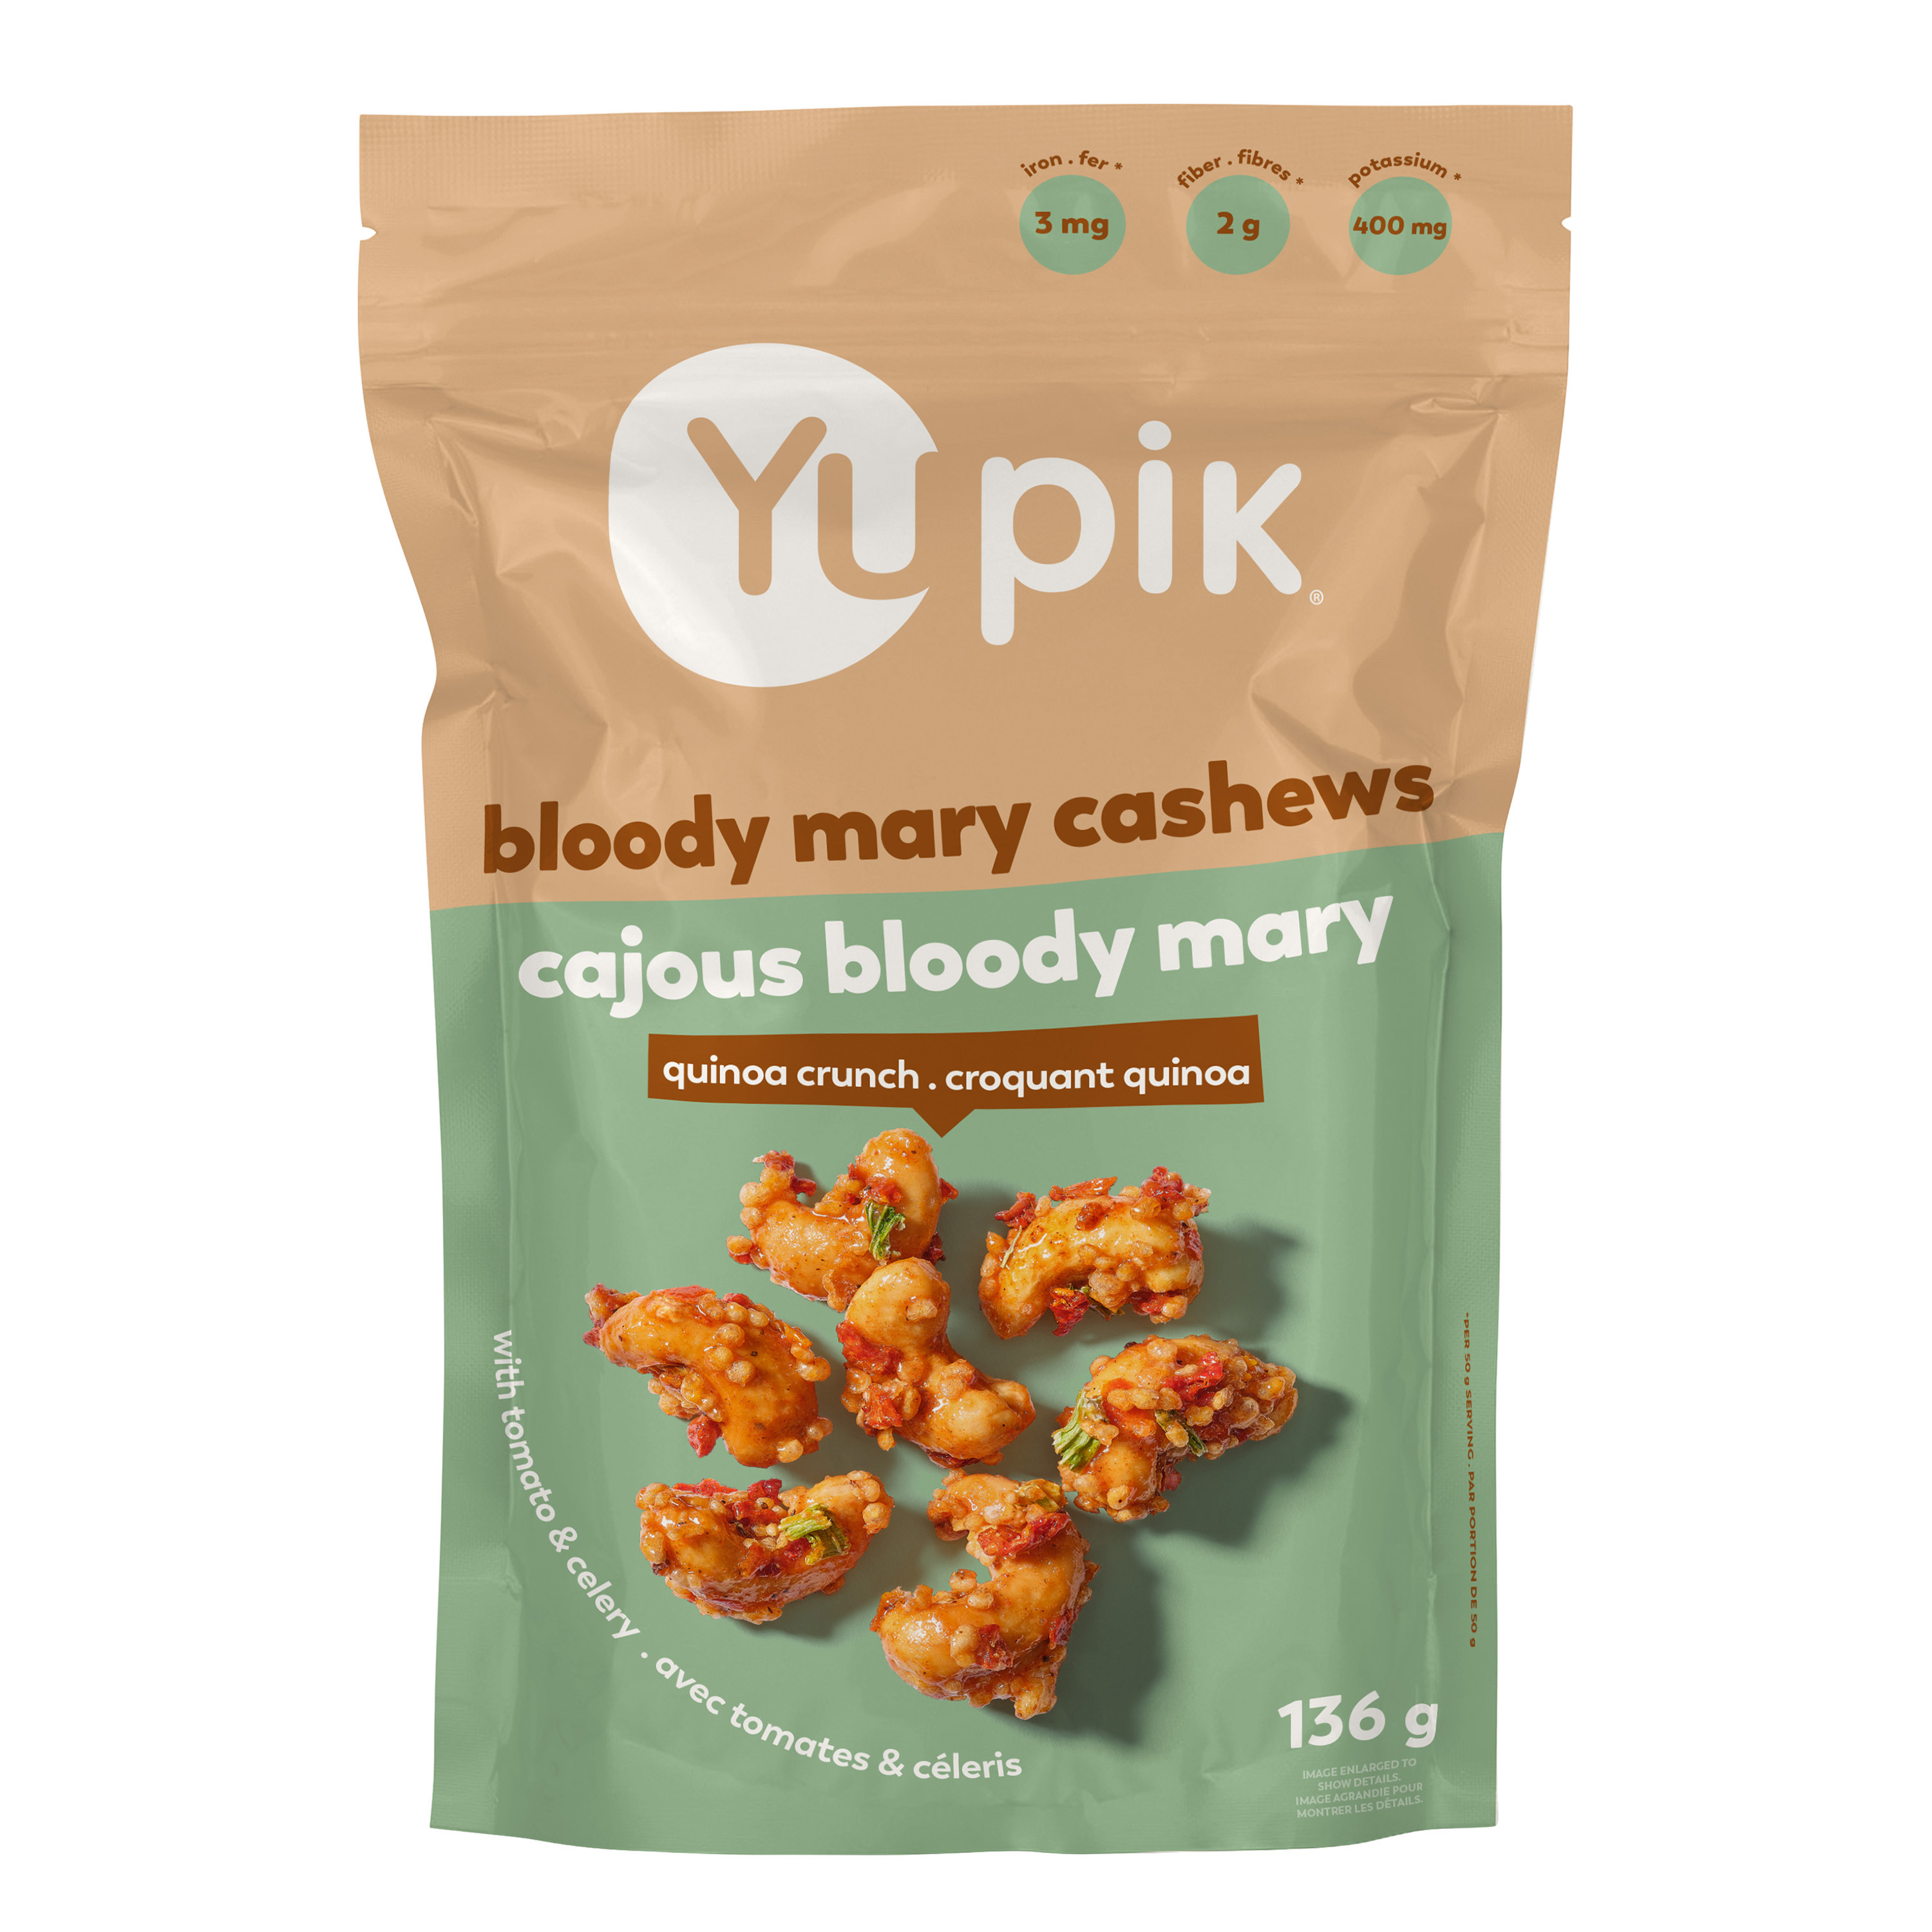 Cashews, Organic cane sugar, Quinoa, Seasoning [tomato (concentrate, flakes, powder), salt, aged red cayenne peppers, distilled vinegar, spices, maltodextrin, lime juice powder, natural flavour (Mustard), citric acid, celery seeds, silicon dioxide, celery flakes], Organic coconut oil